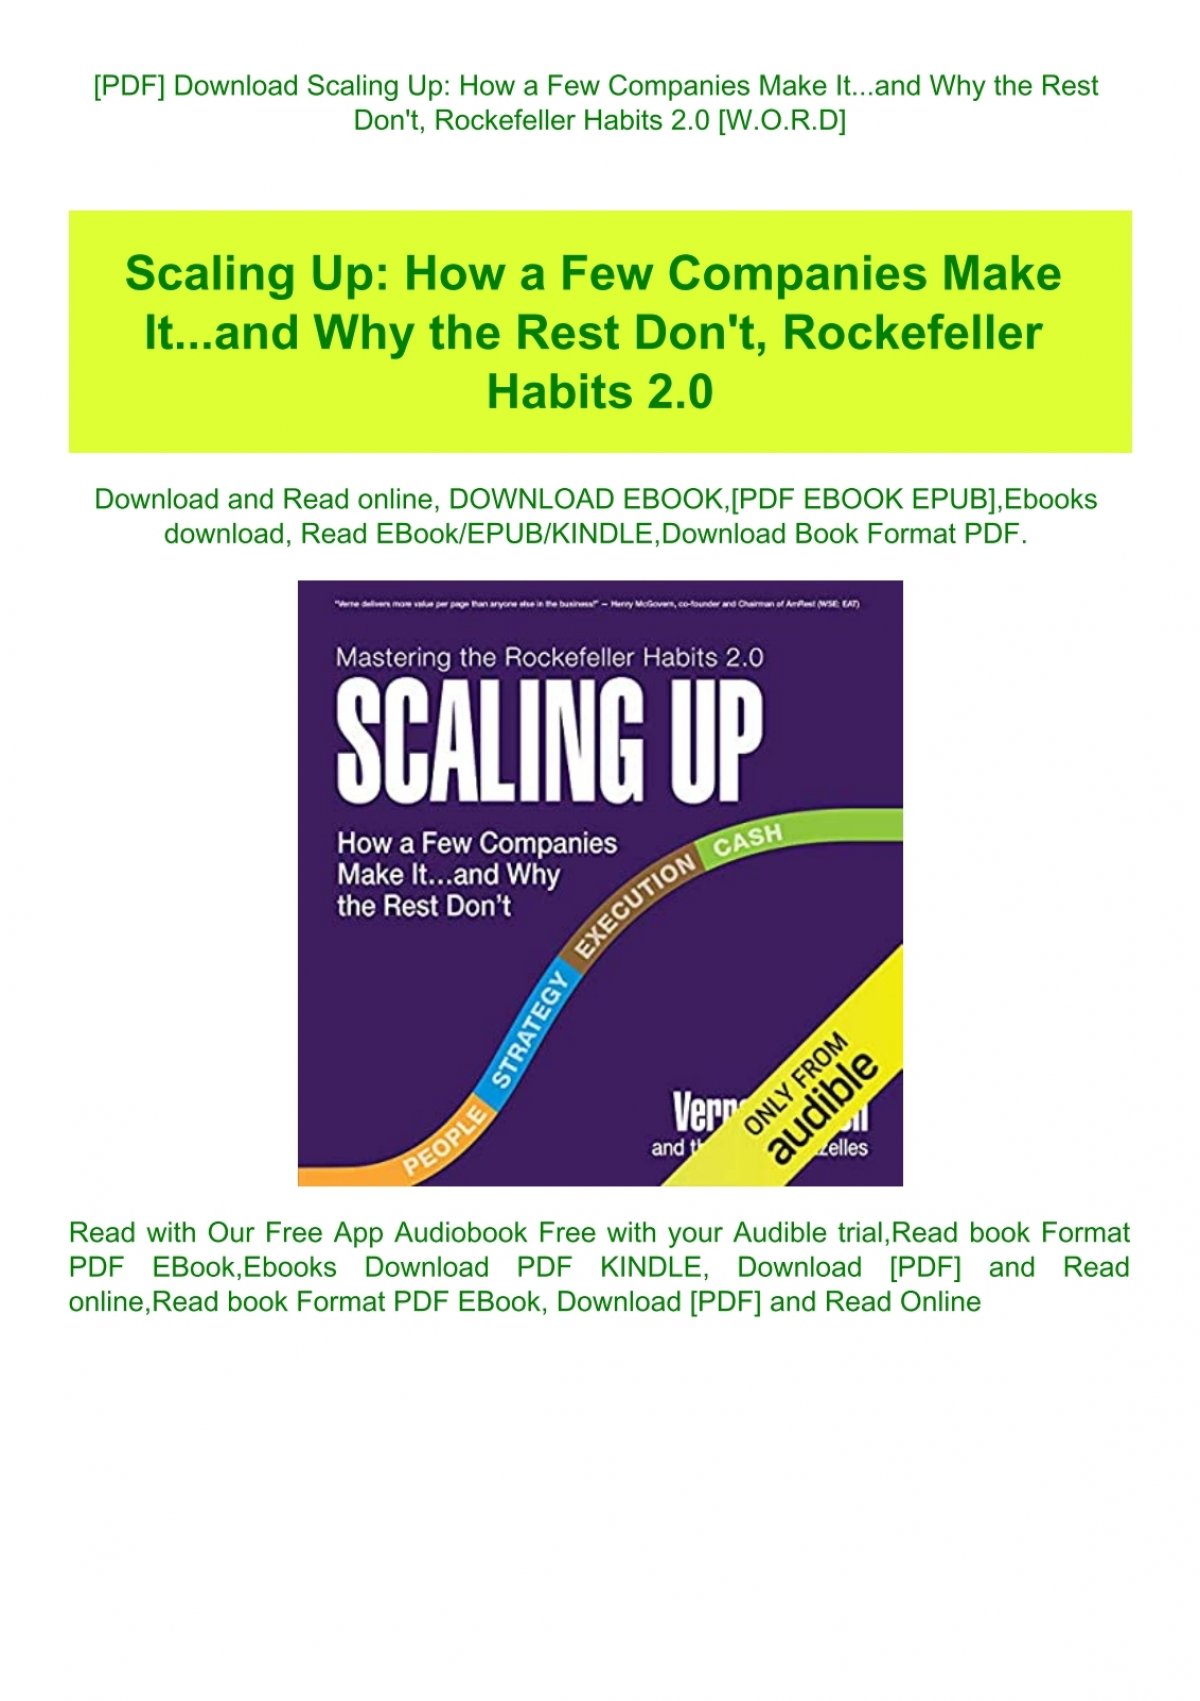  Scaling Up: How a Few Companies Make Itand Why the Rest Don't  (Rockefeller Habits 2.0 Revised Edition): 9780986019593: Harnish, Verne:  Books